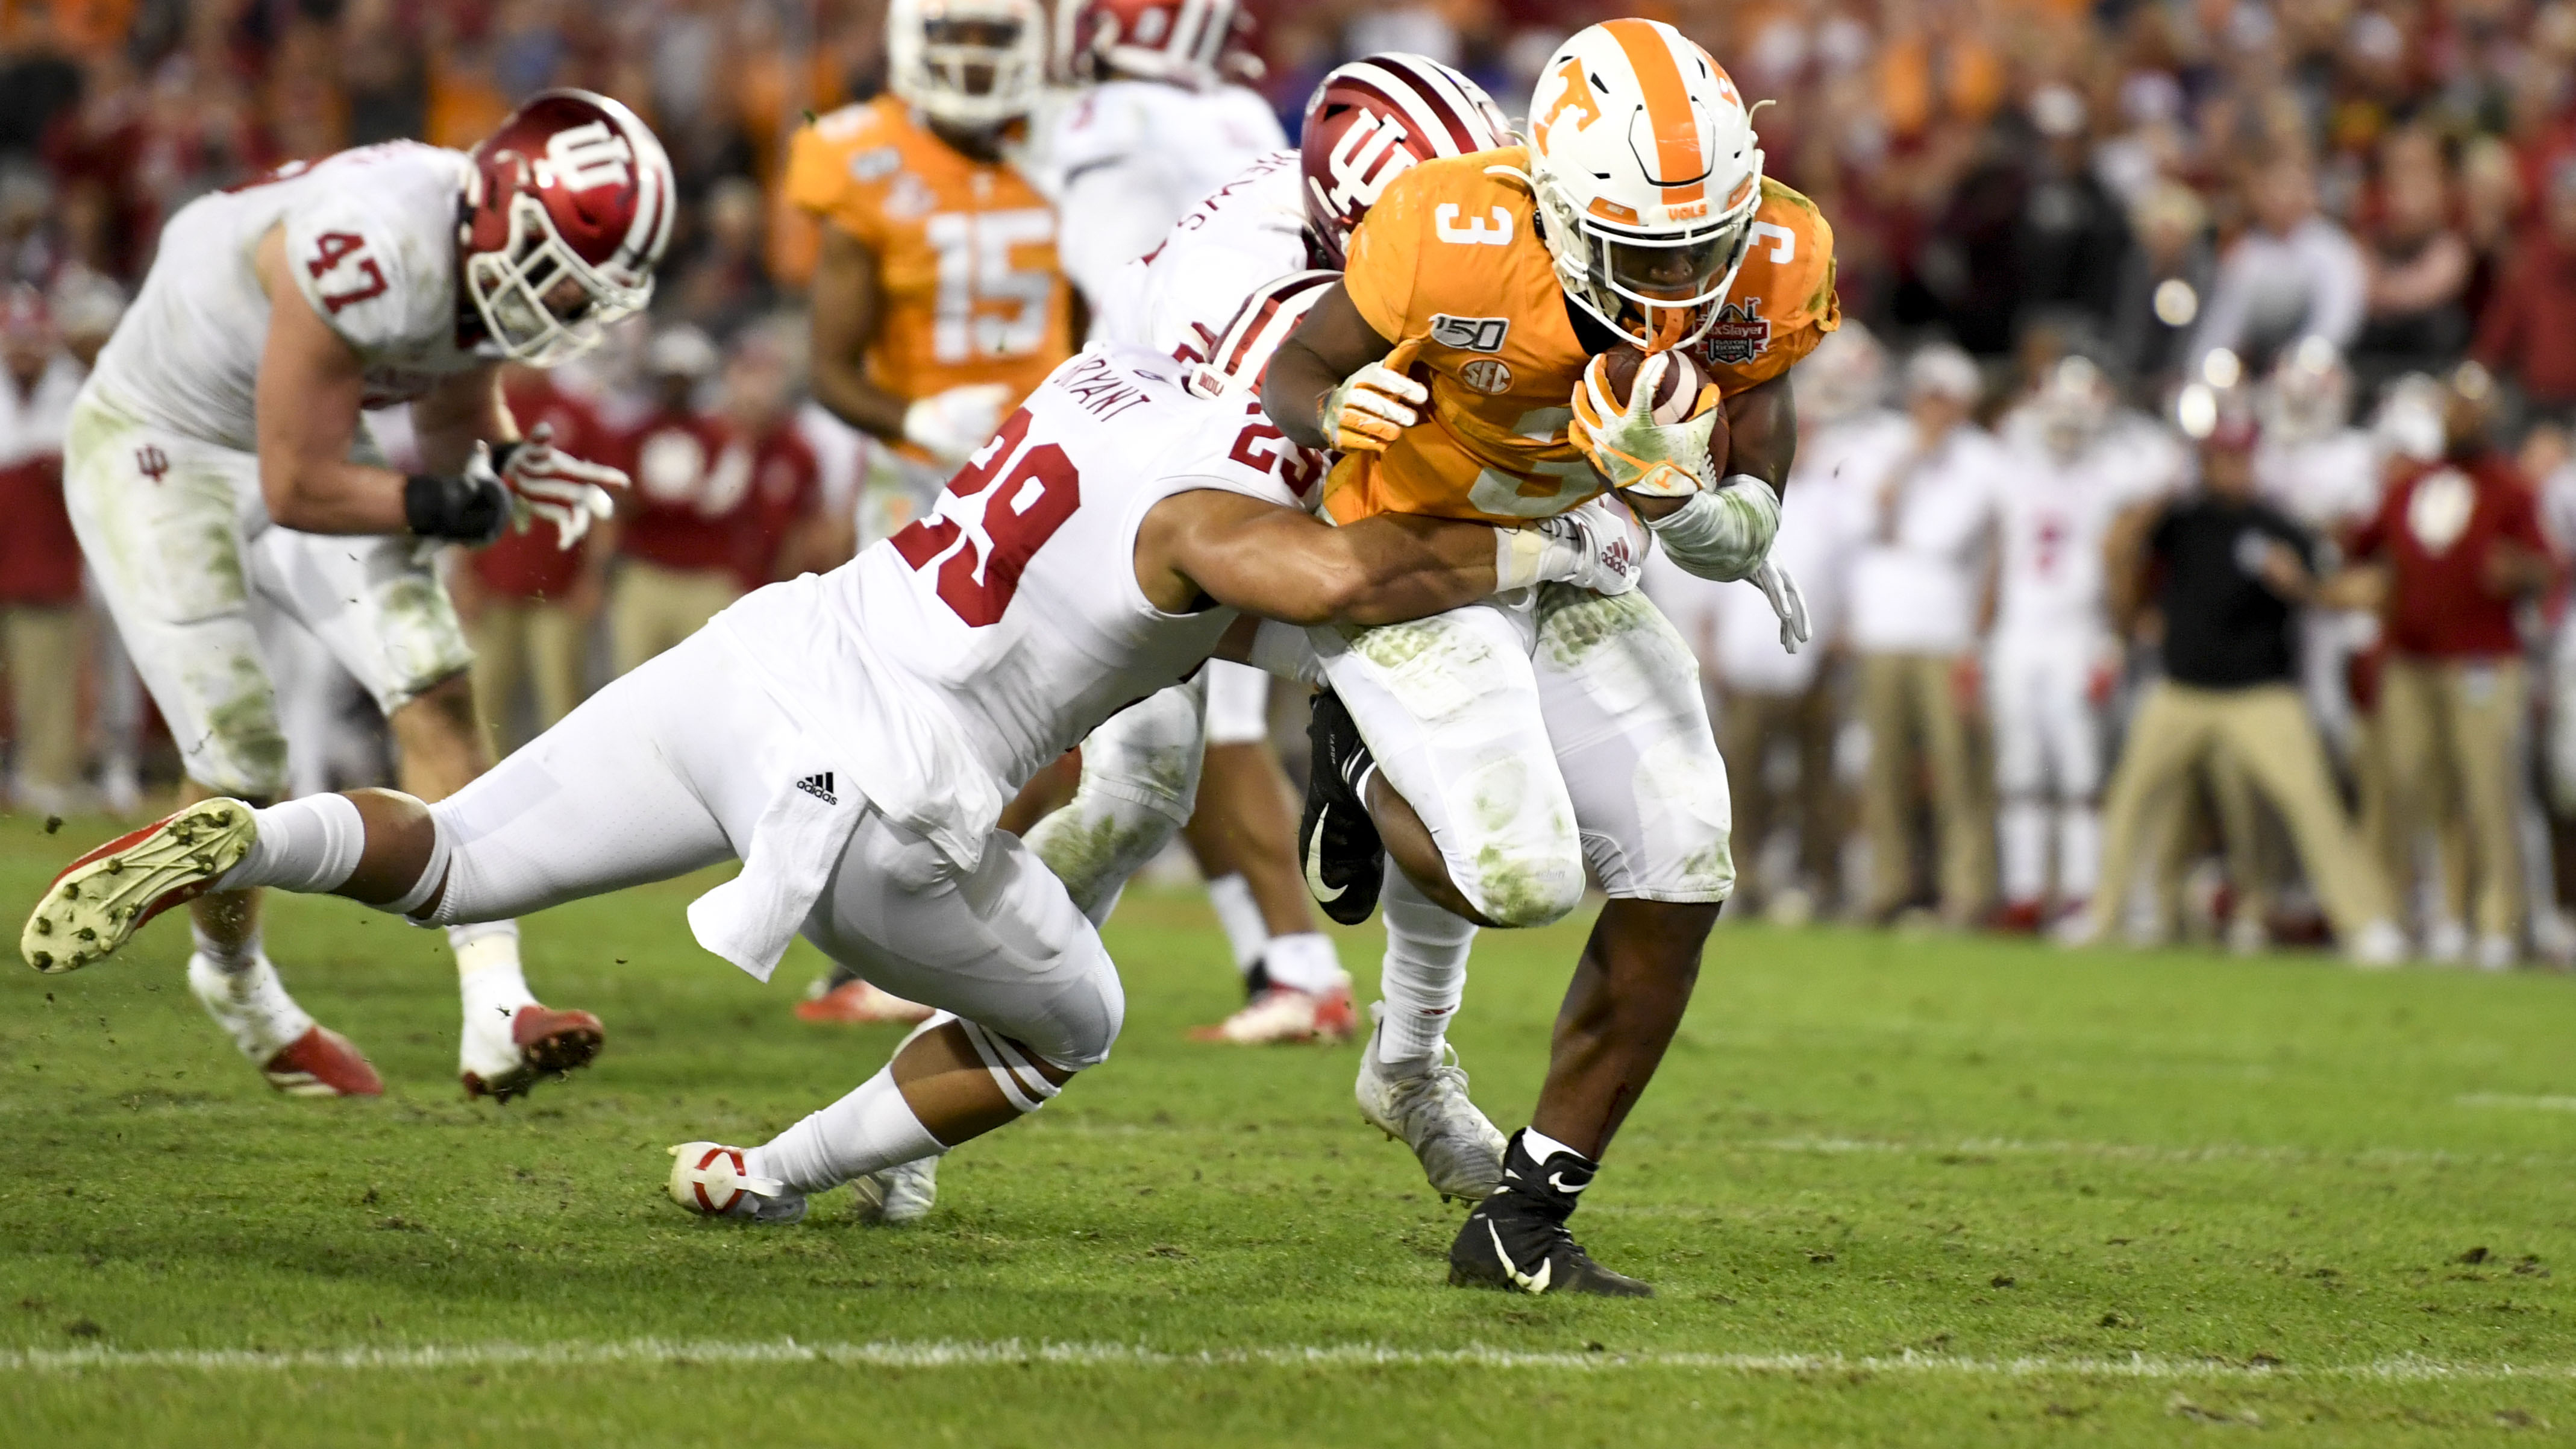 Hoosiers give up two late touchdowns, suffer 23-22 loss to Vols in Gator Bowl